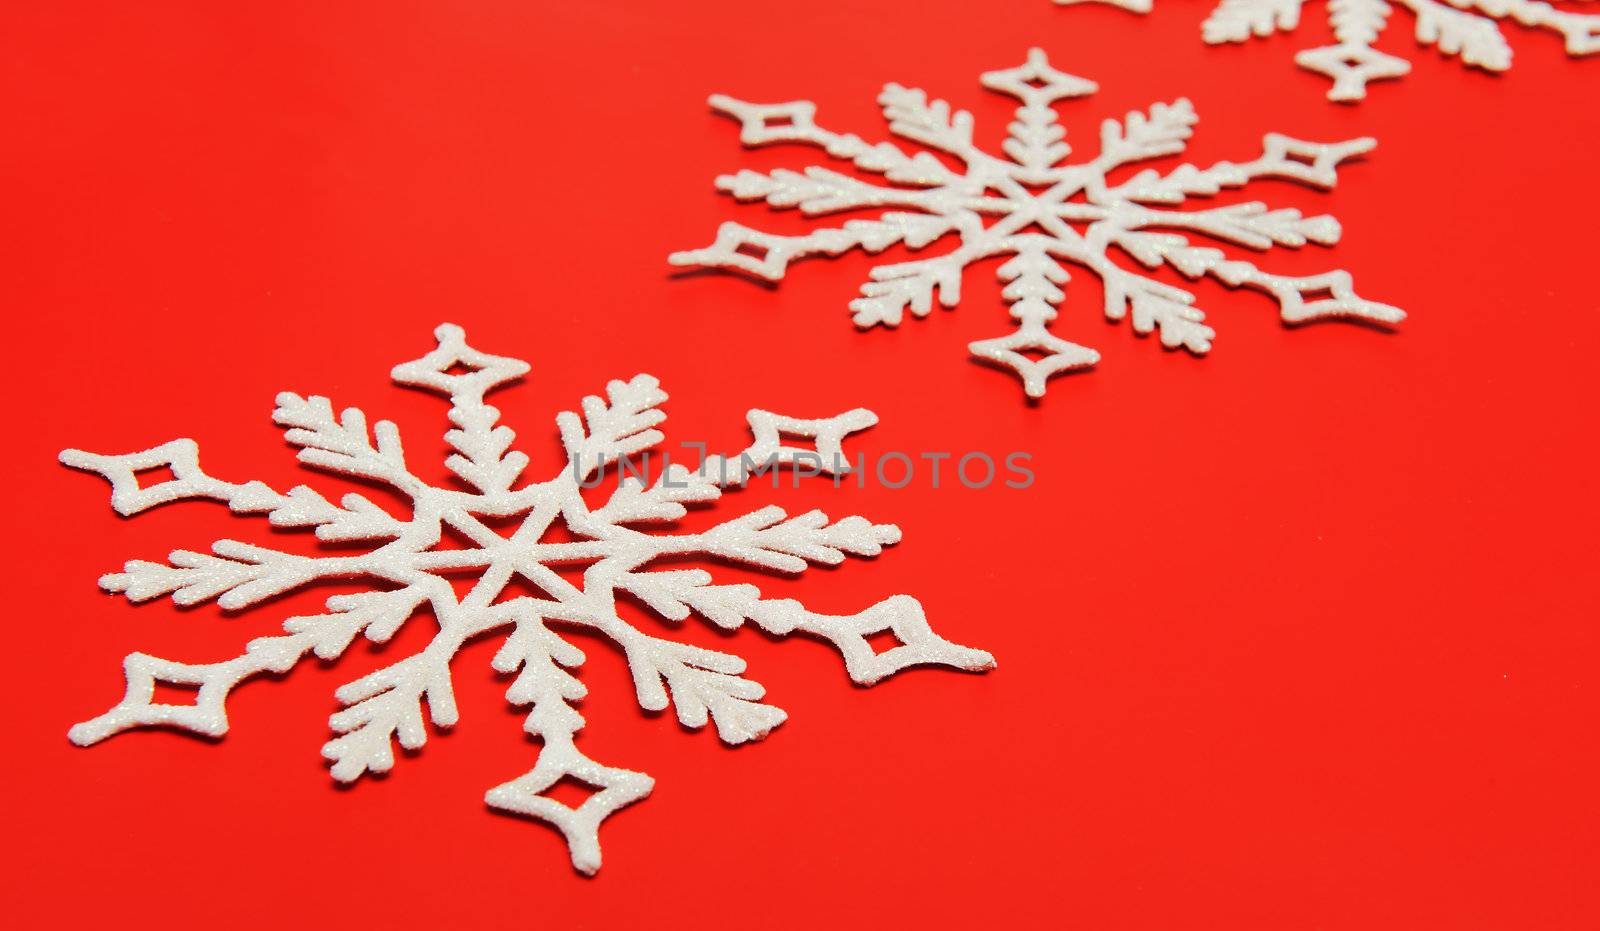 The big snowflake on a red background by galdzer